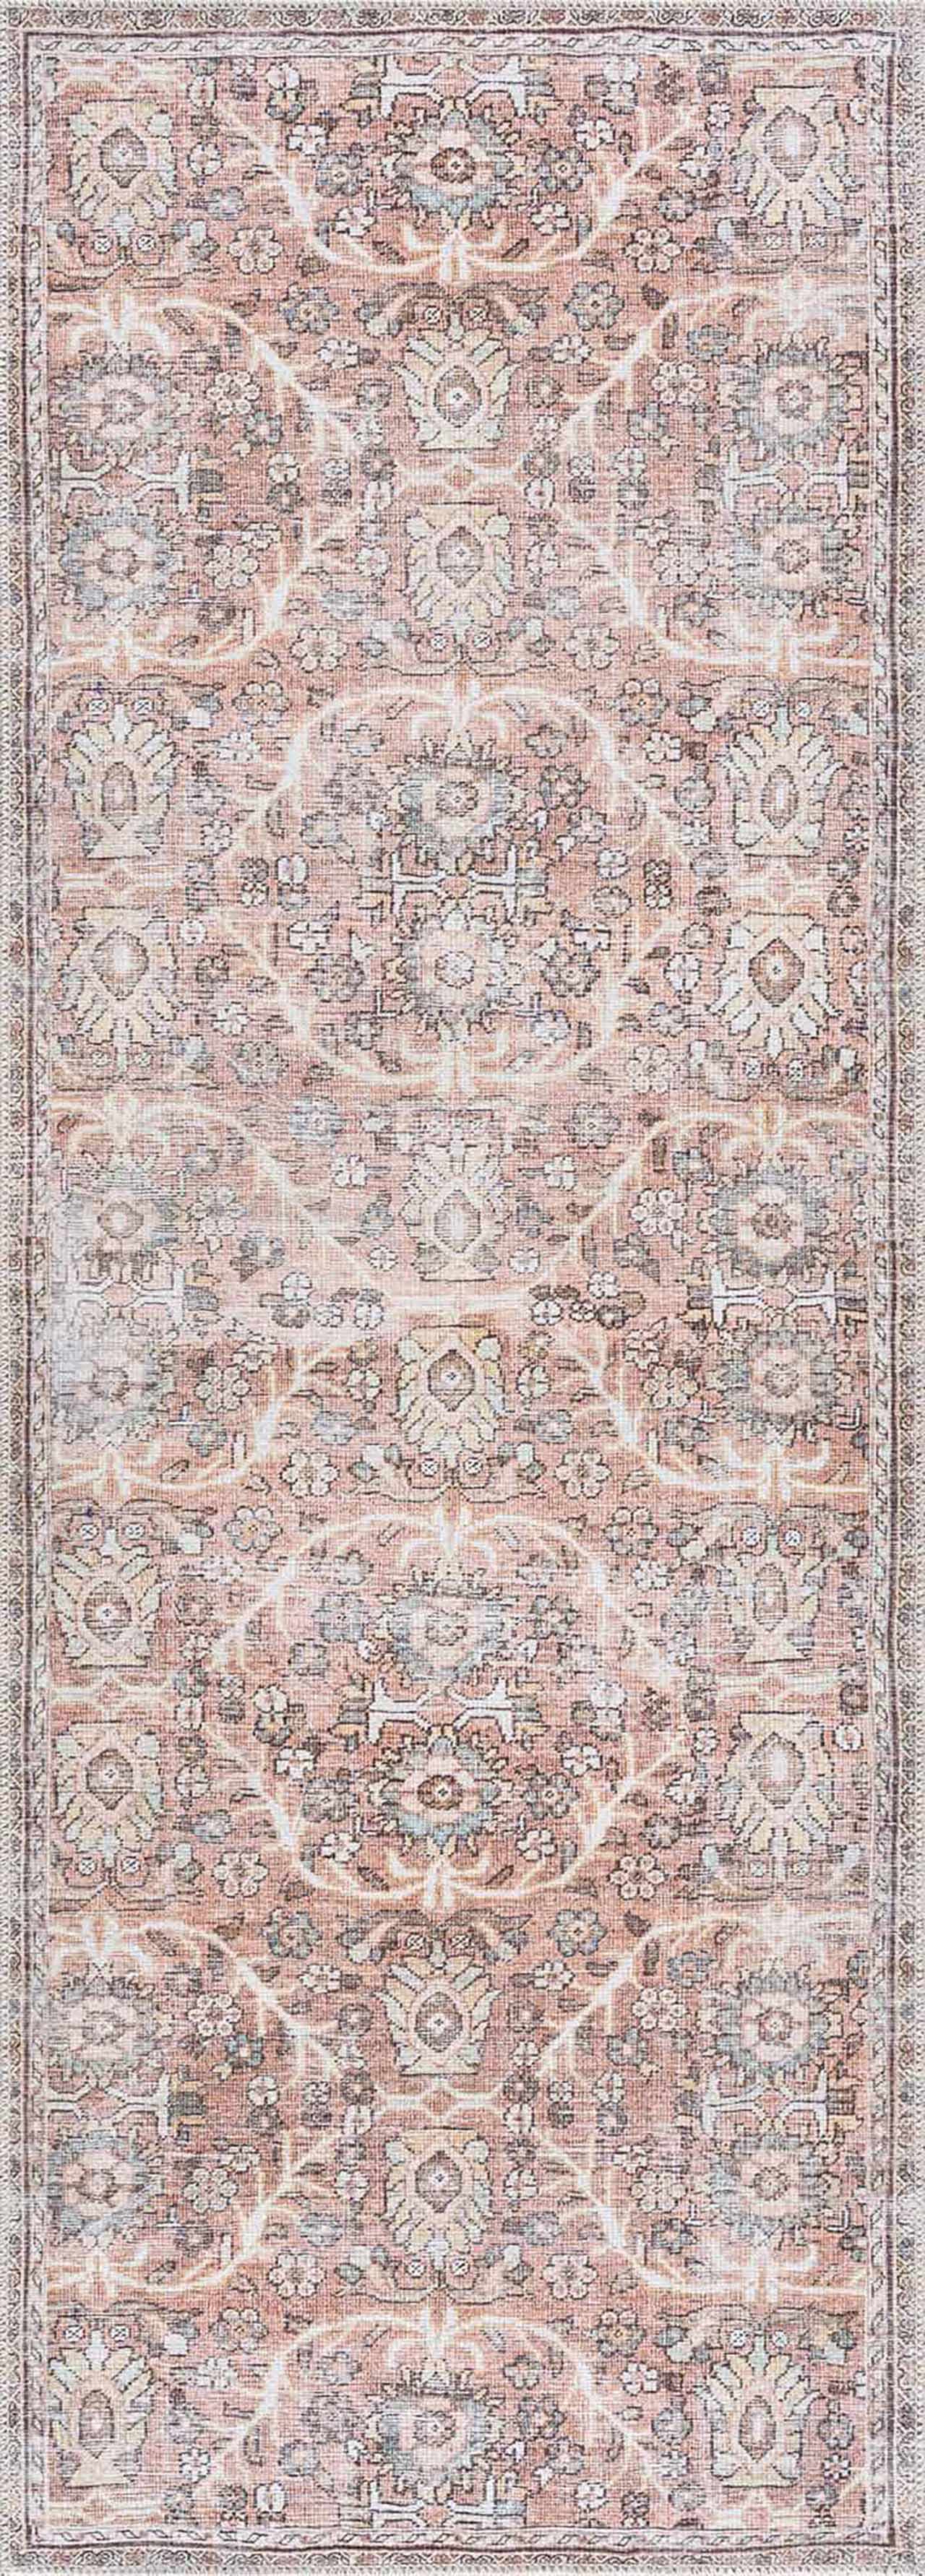 Urpi Rose & Brown Washable Area Rug - Clearance